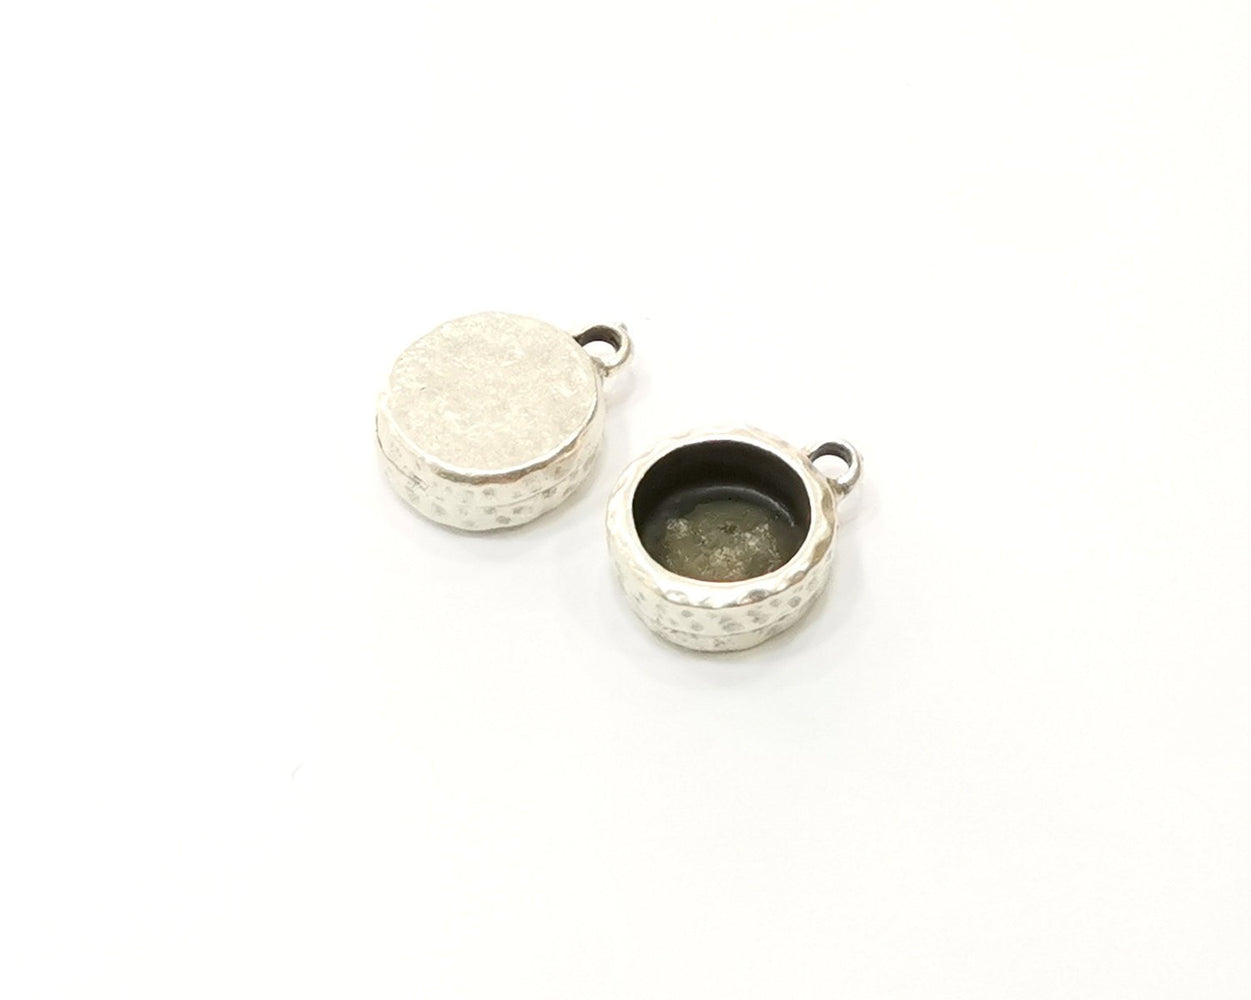 5 Silver Hammered Base Blank inlay Blank Pendant Base Resin Blank Mosaic Mountings Antique Silver Plated Metal (8mm blank )  G16947